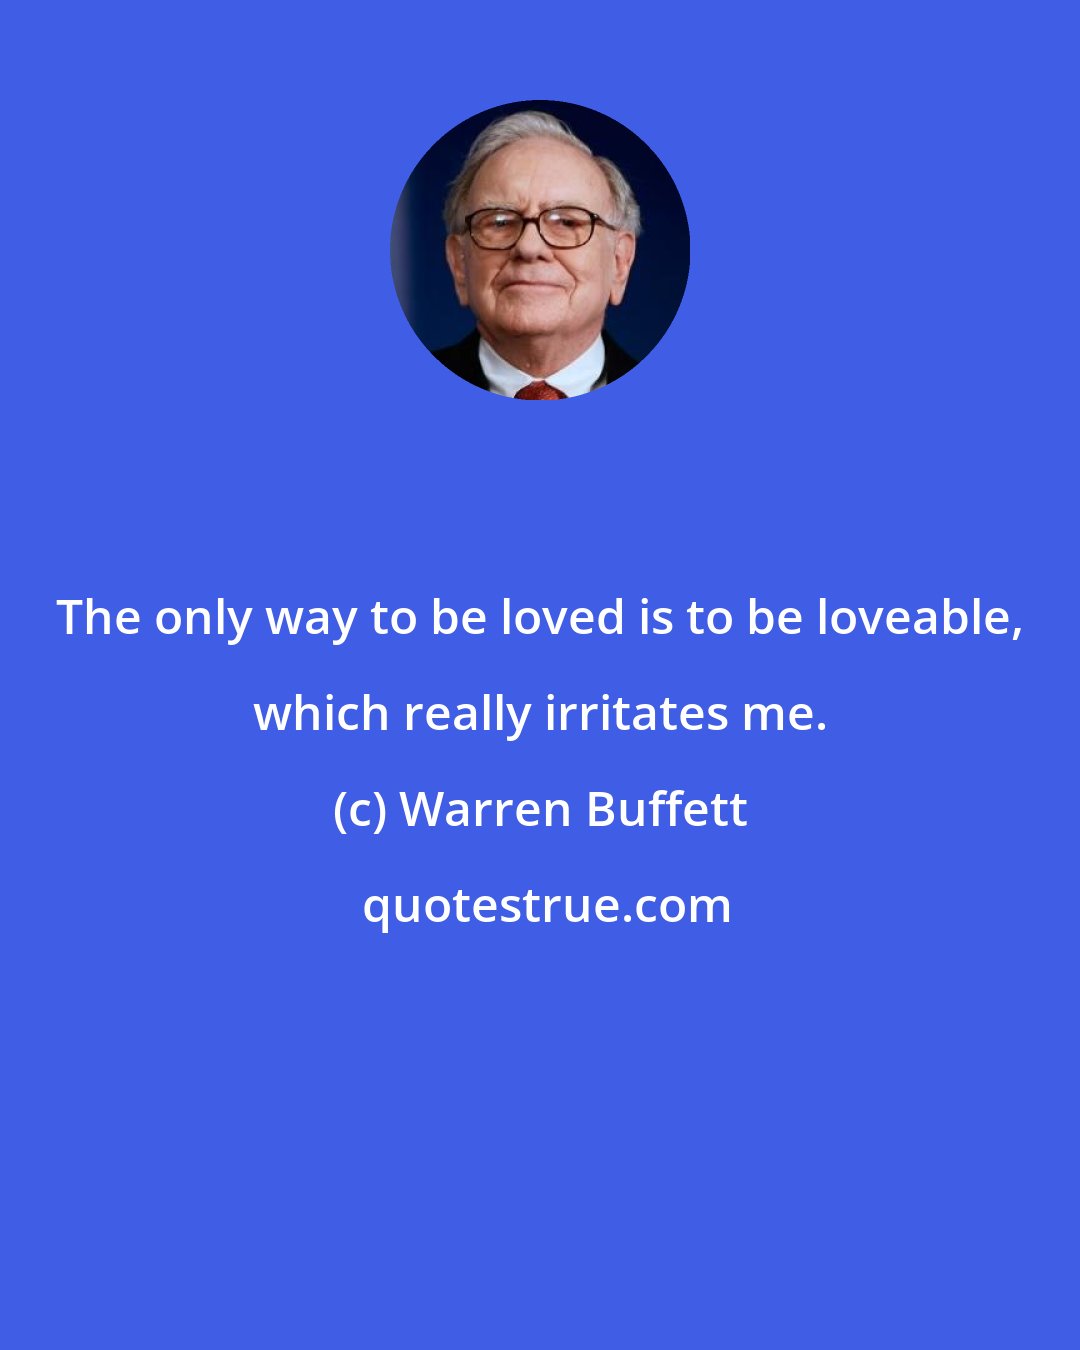 Warren Buffett: The only way to be loved is to be loveable, which really irritates me.